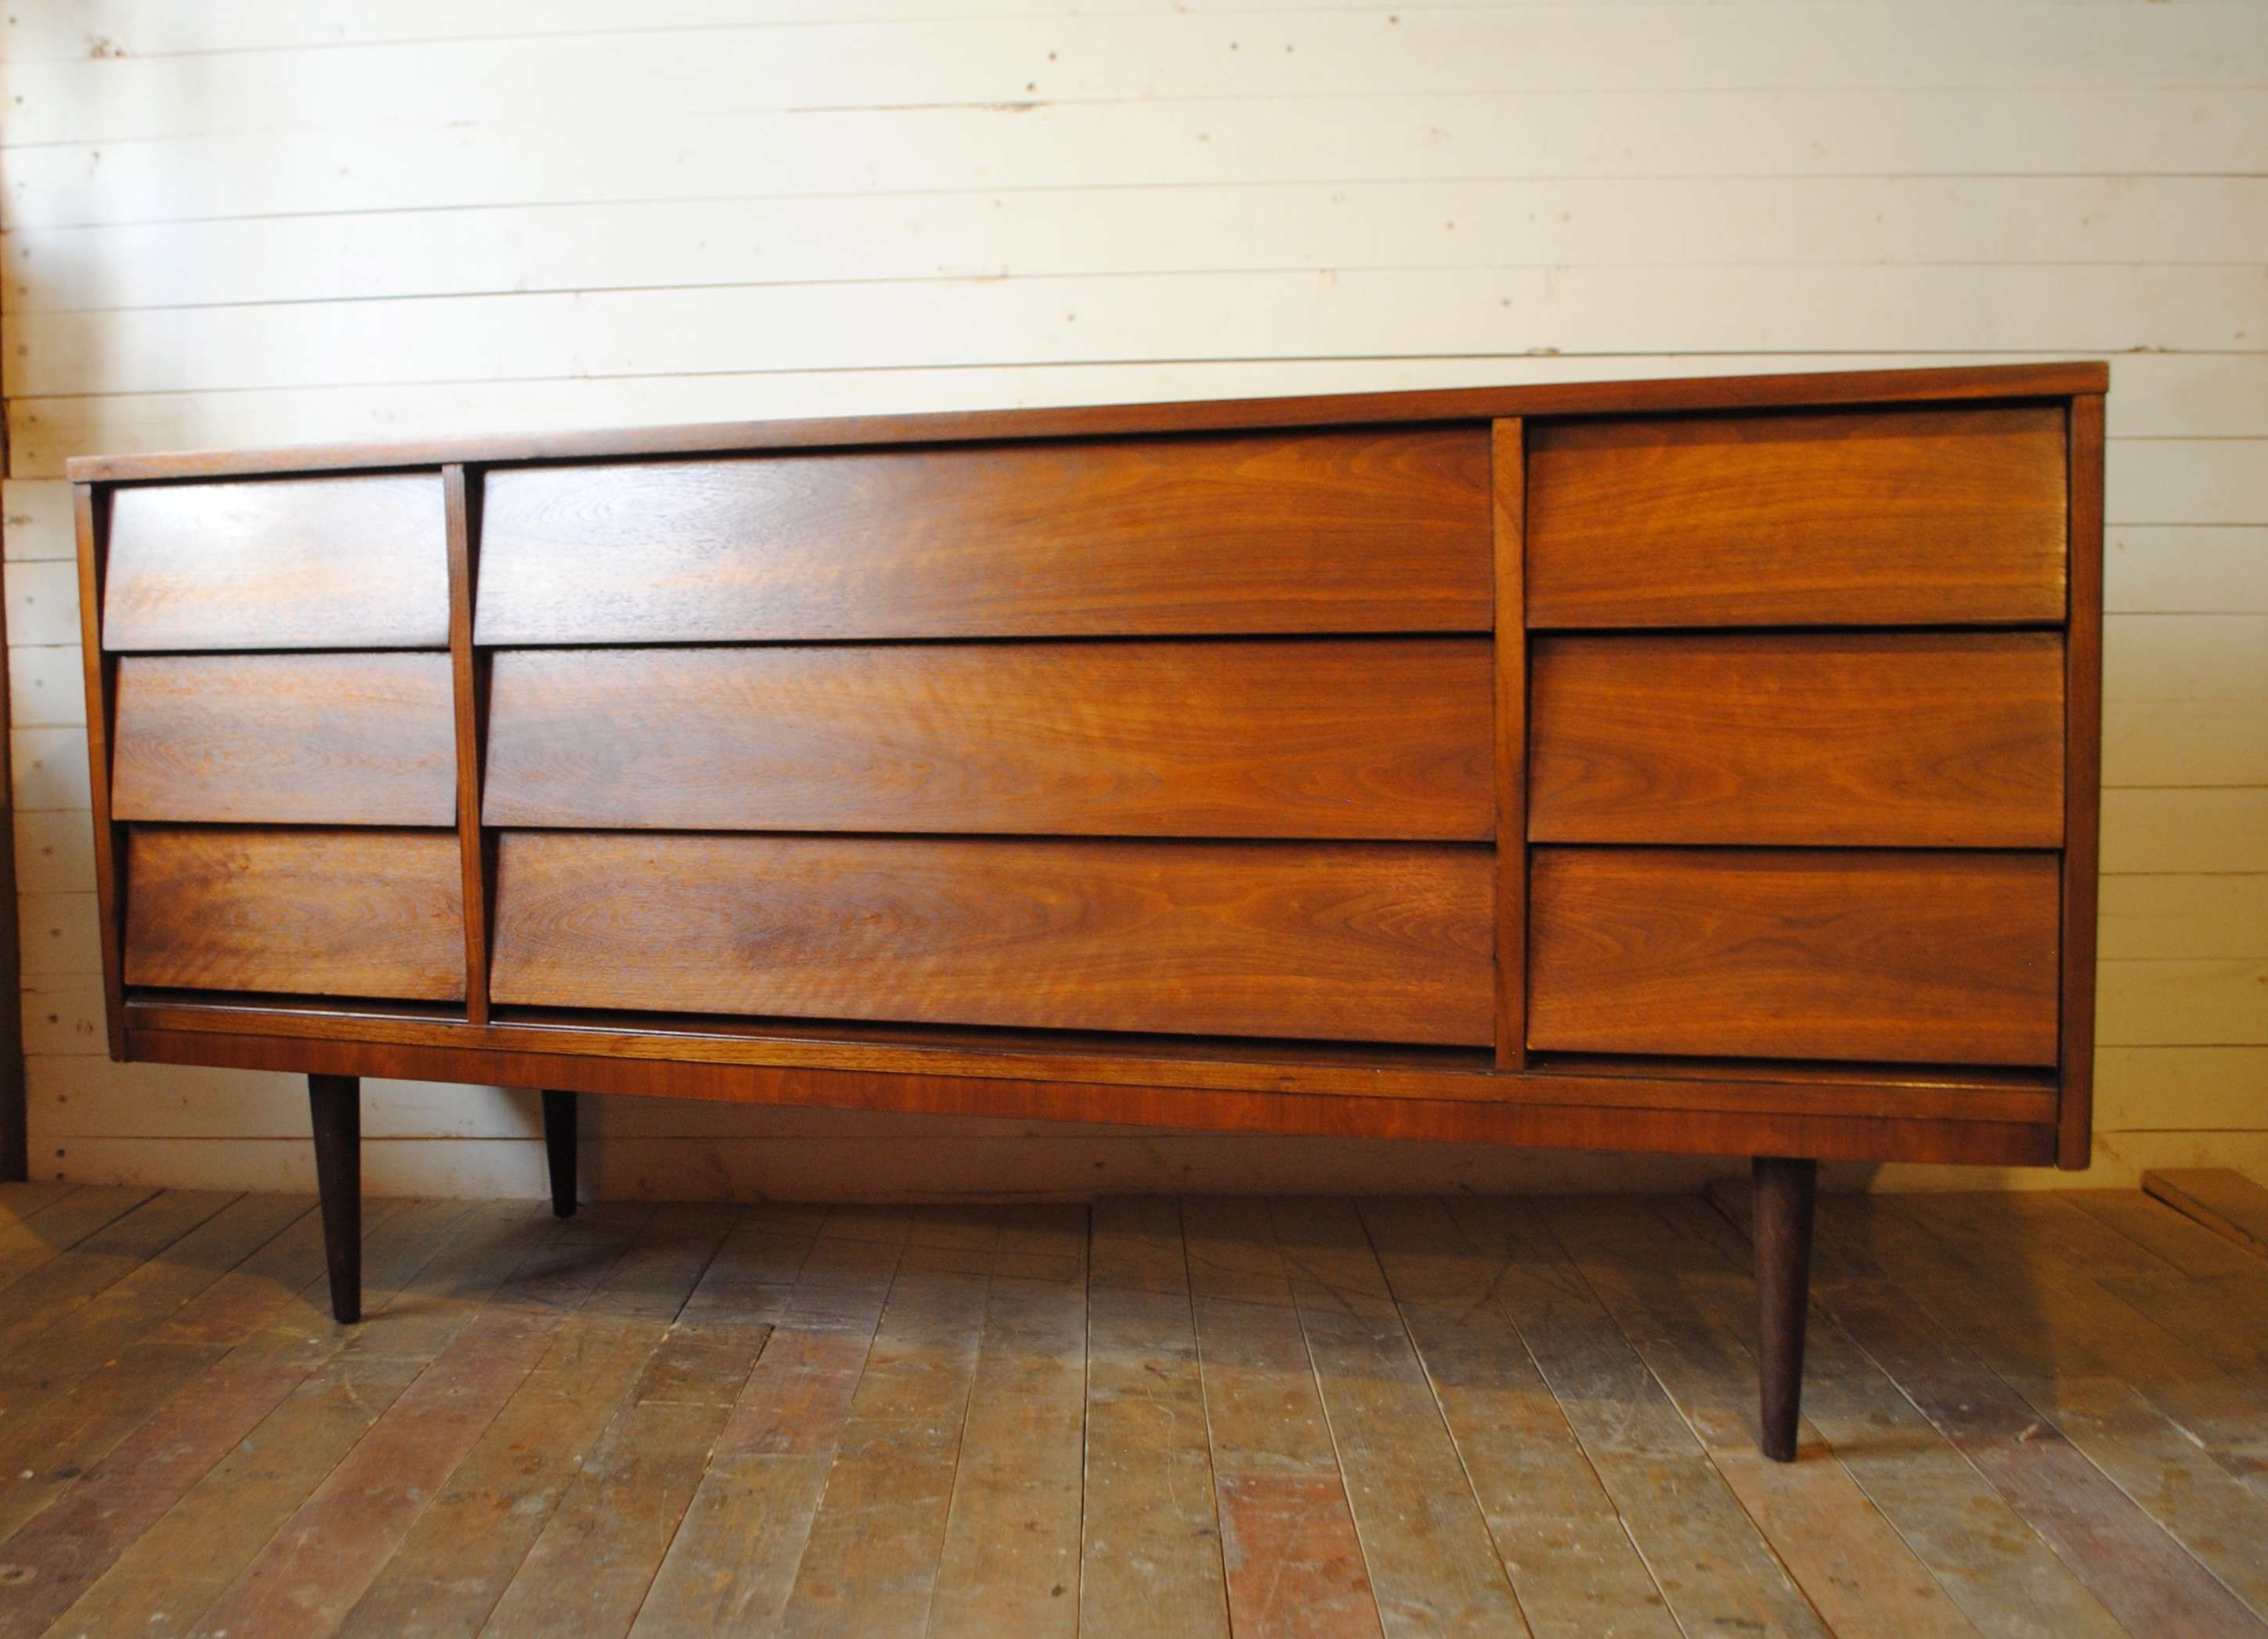 Credenzas And Sideboards Best Of At Modern Credenzas Sideboards Intended For Midcentury Sideboards (View 8 of 20)